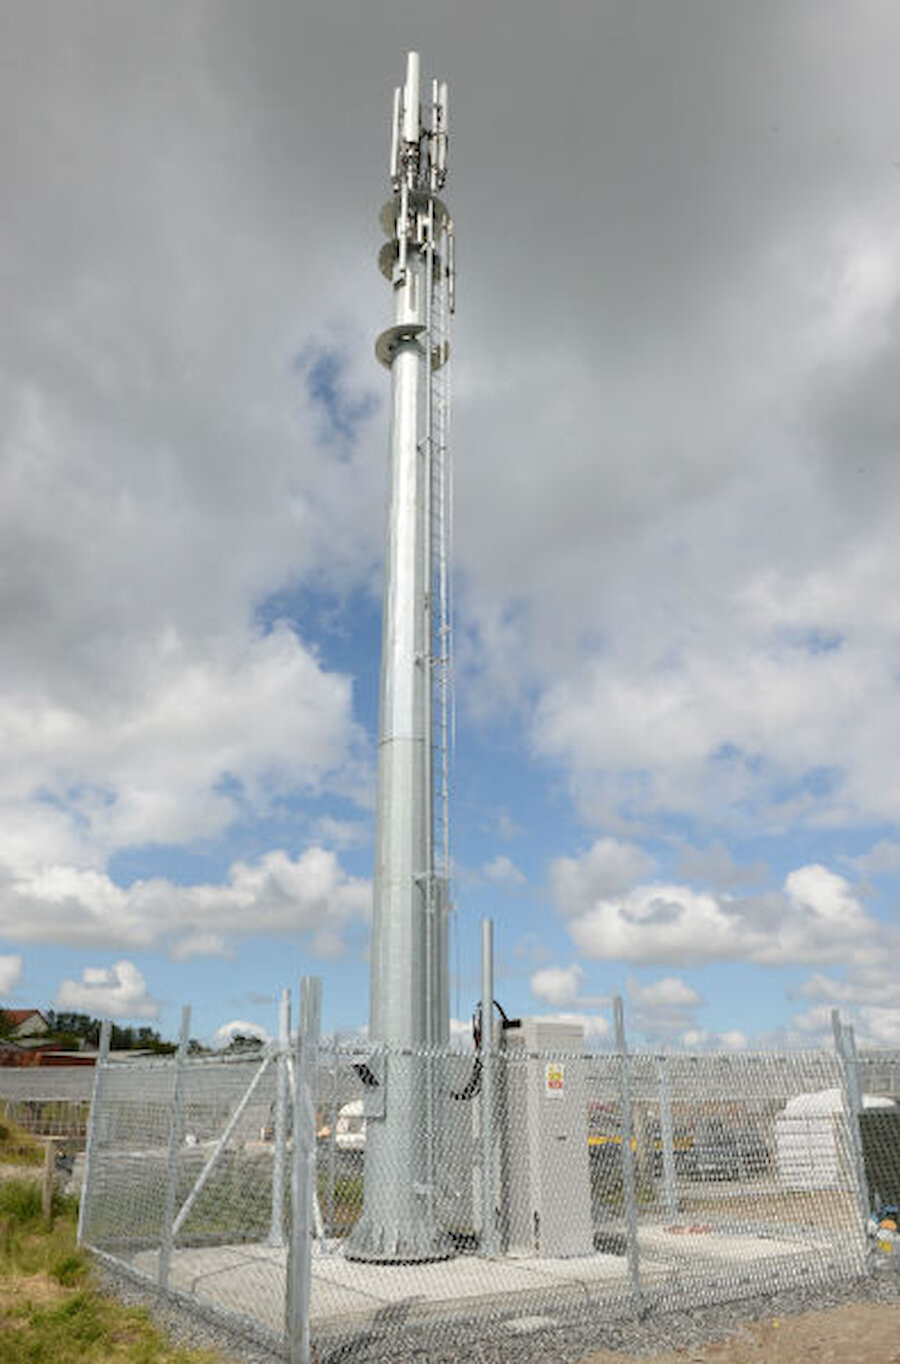 One of many new masts required; this one was recently erected in the Tingwall valley (Courtesy Alastair Hamilton)